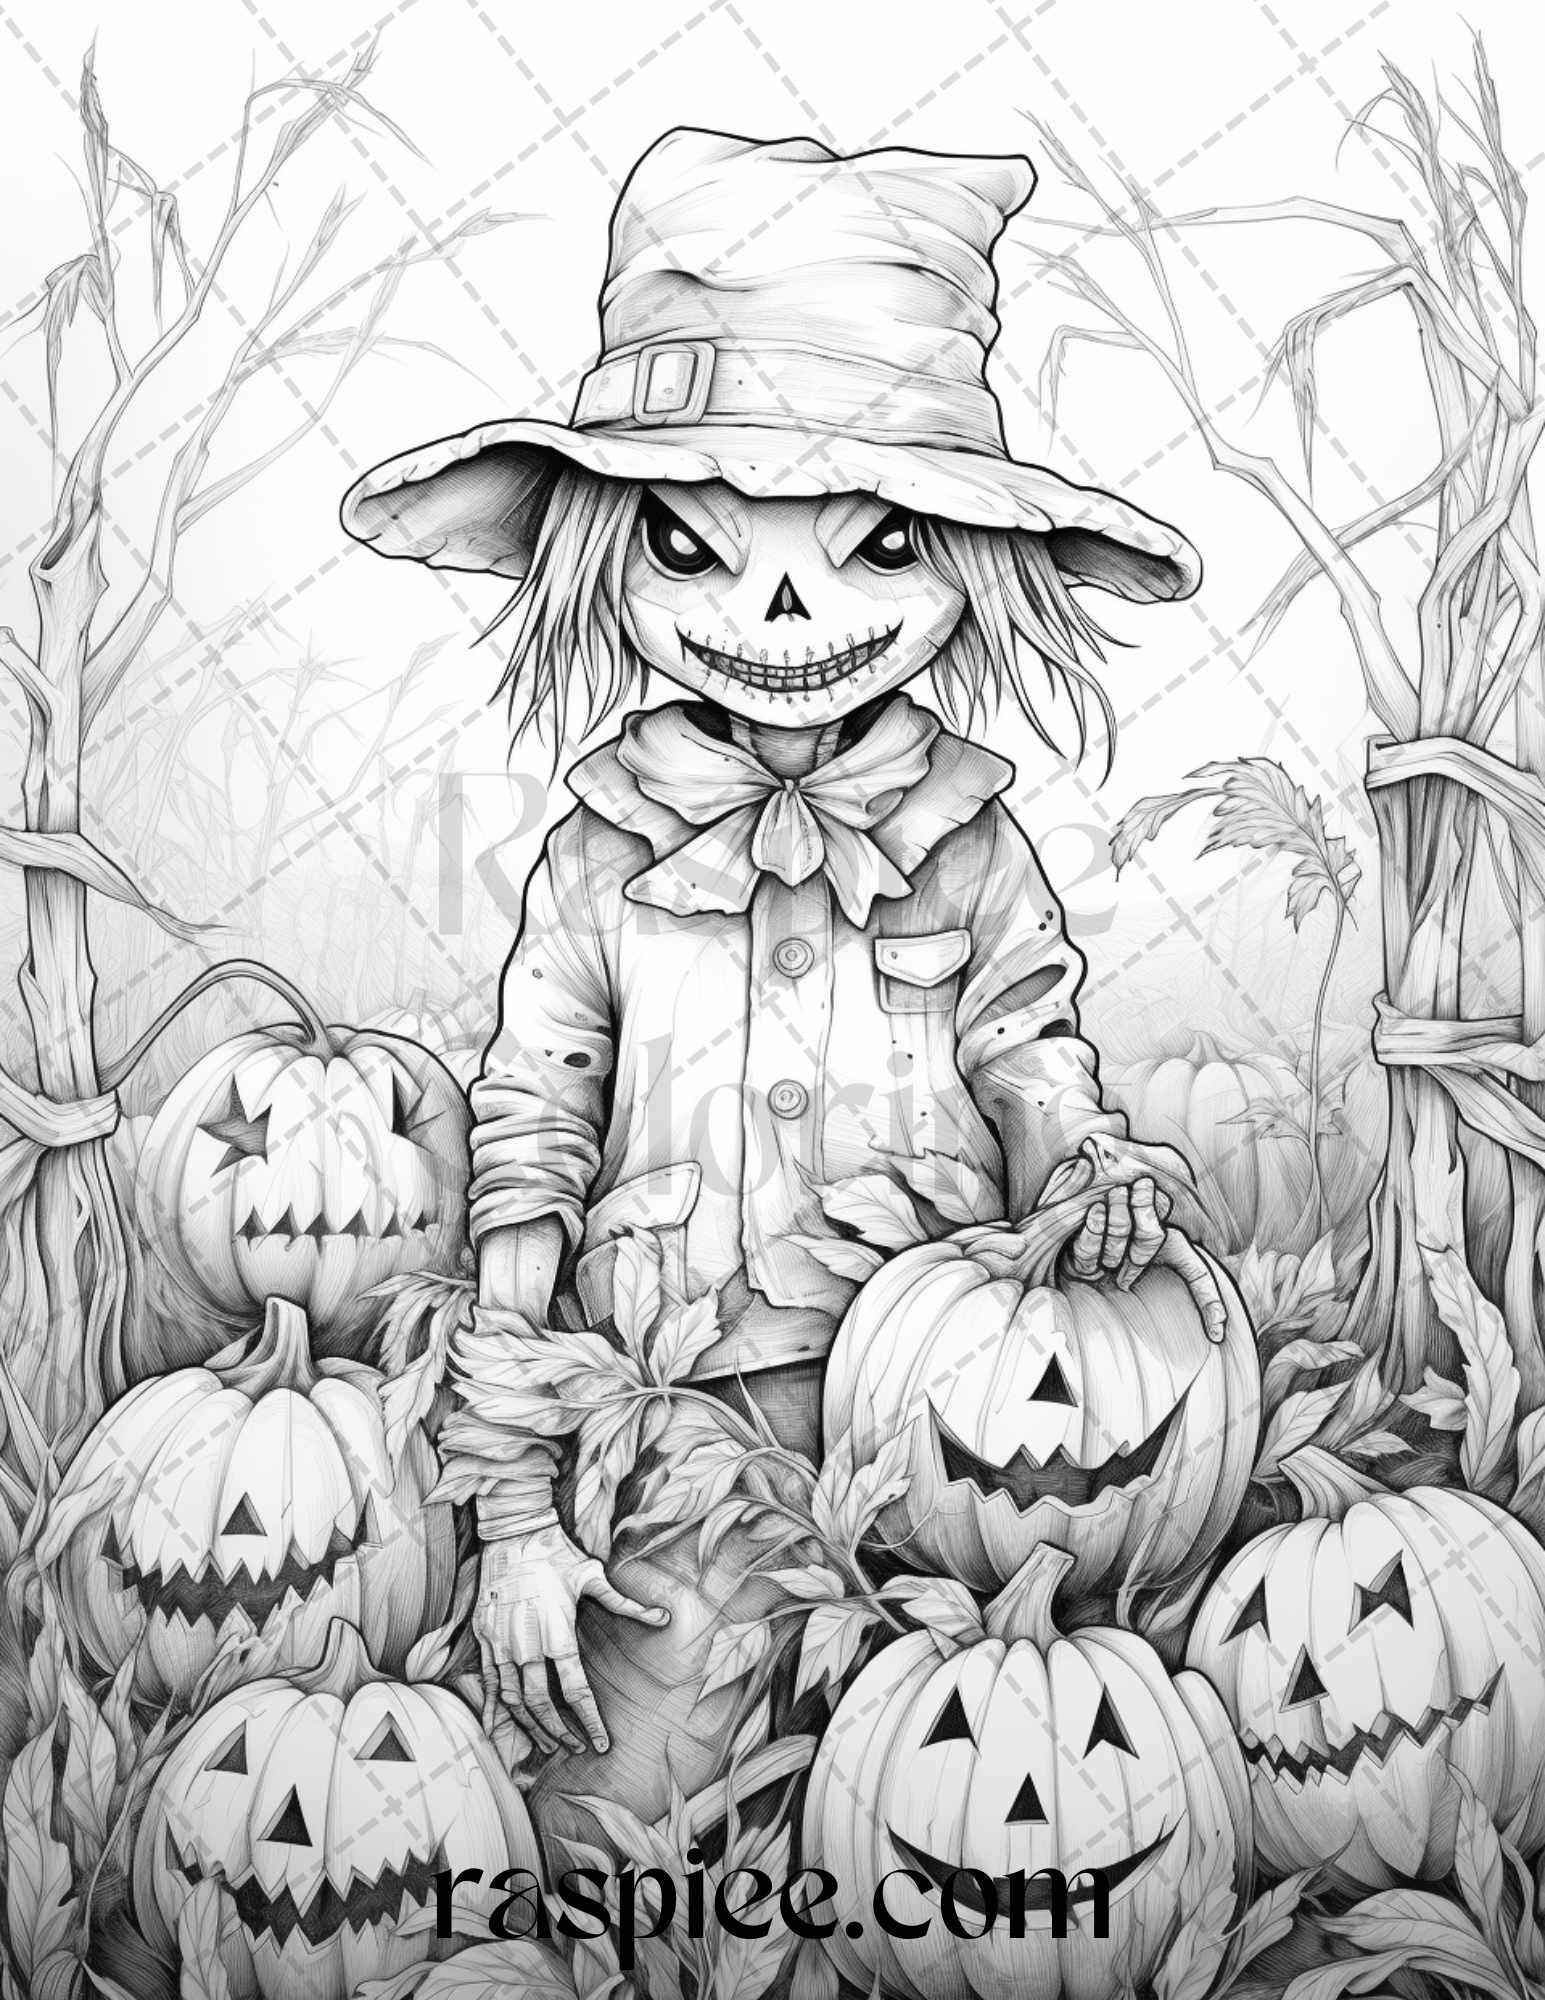 Halloween scarecrows grayscale coloring pages printable for adults â coloring